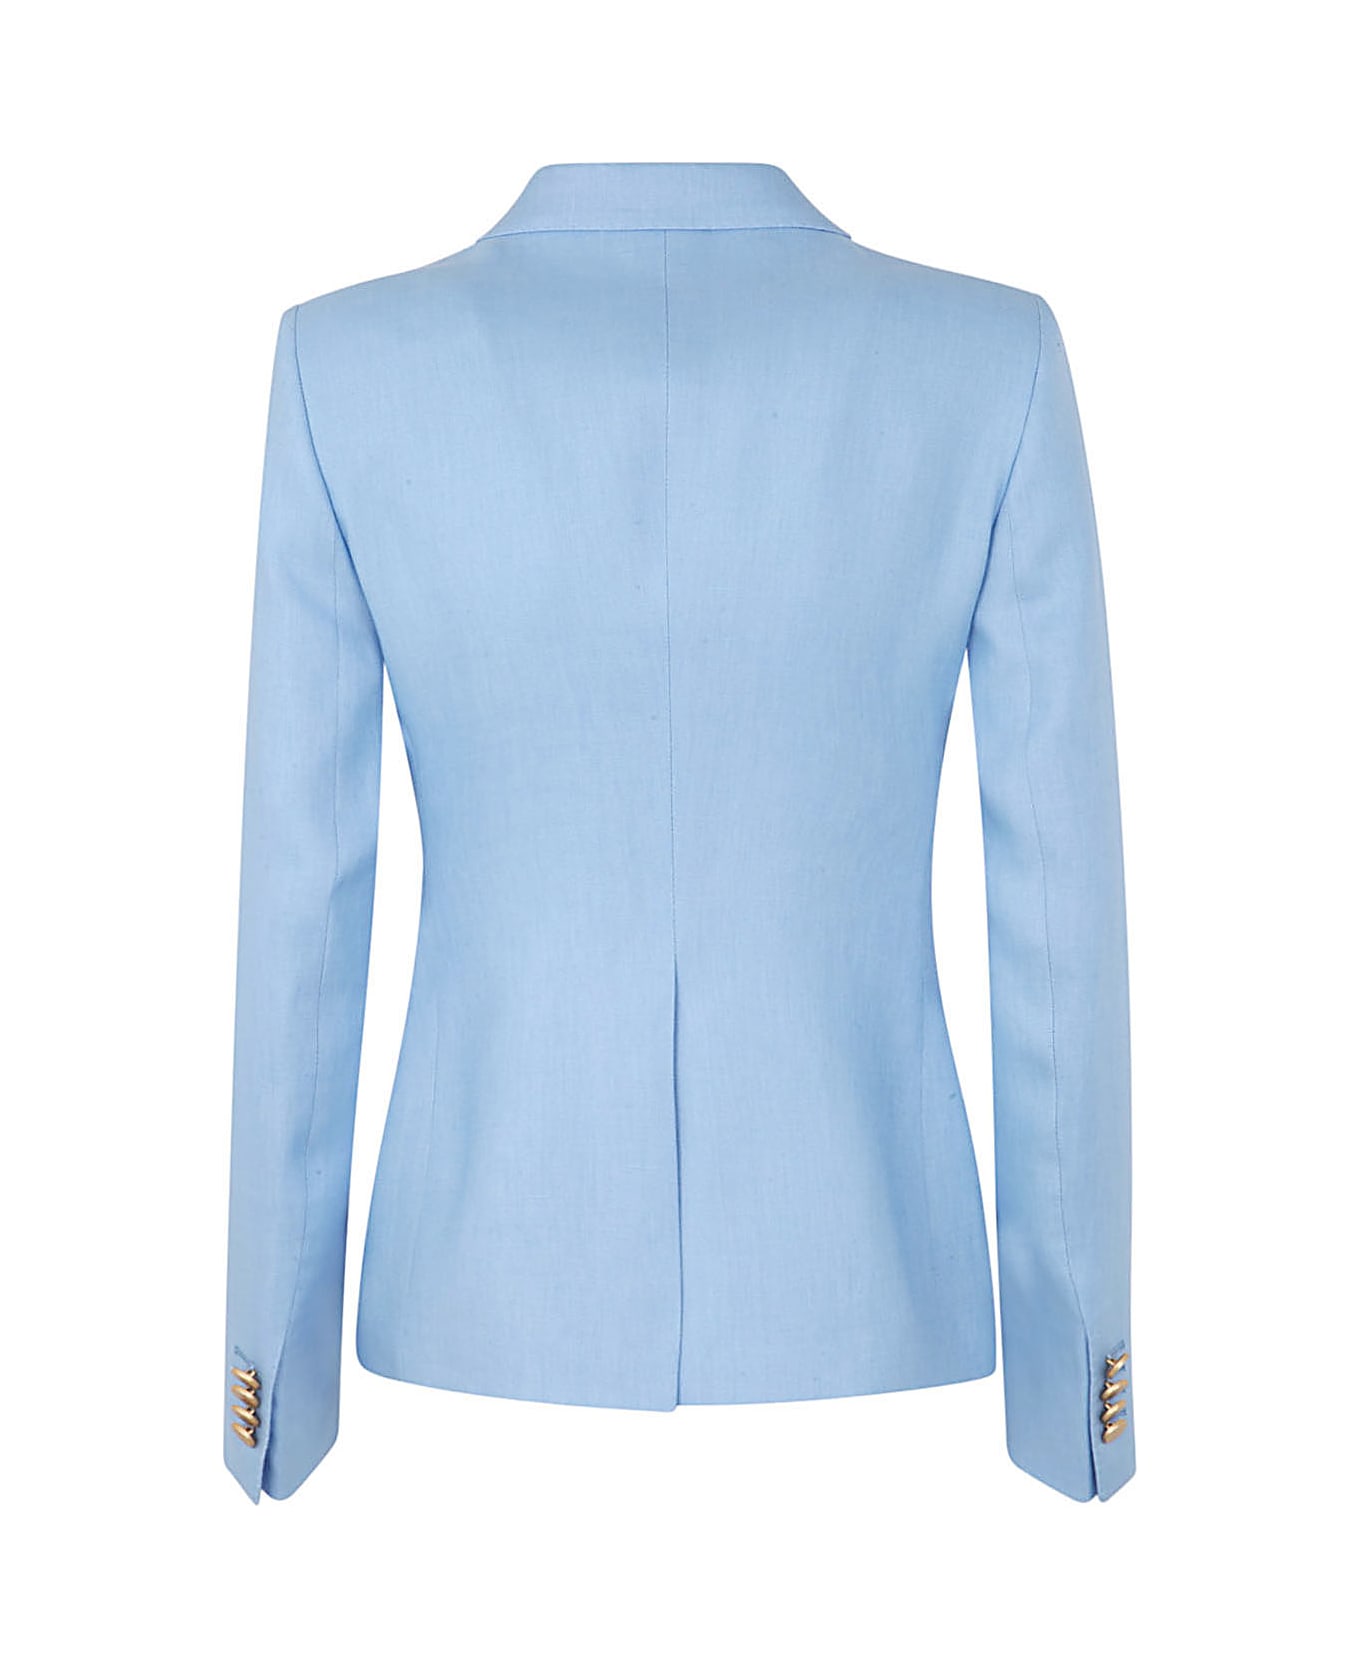 Tagliatore Four Buttons Double Breasted Blazer - Light Blue ブレザー